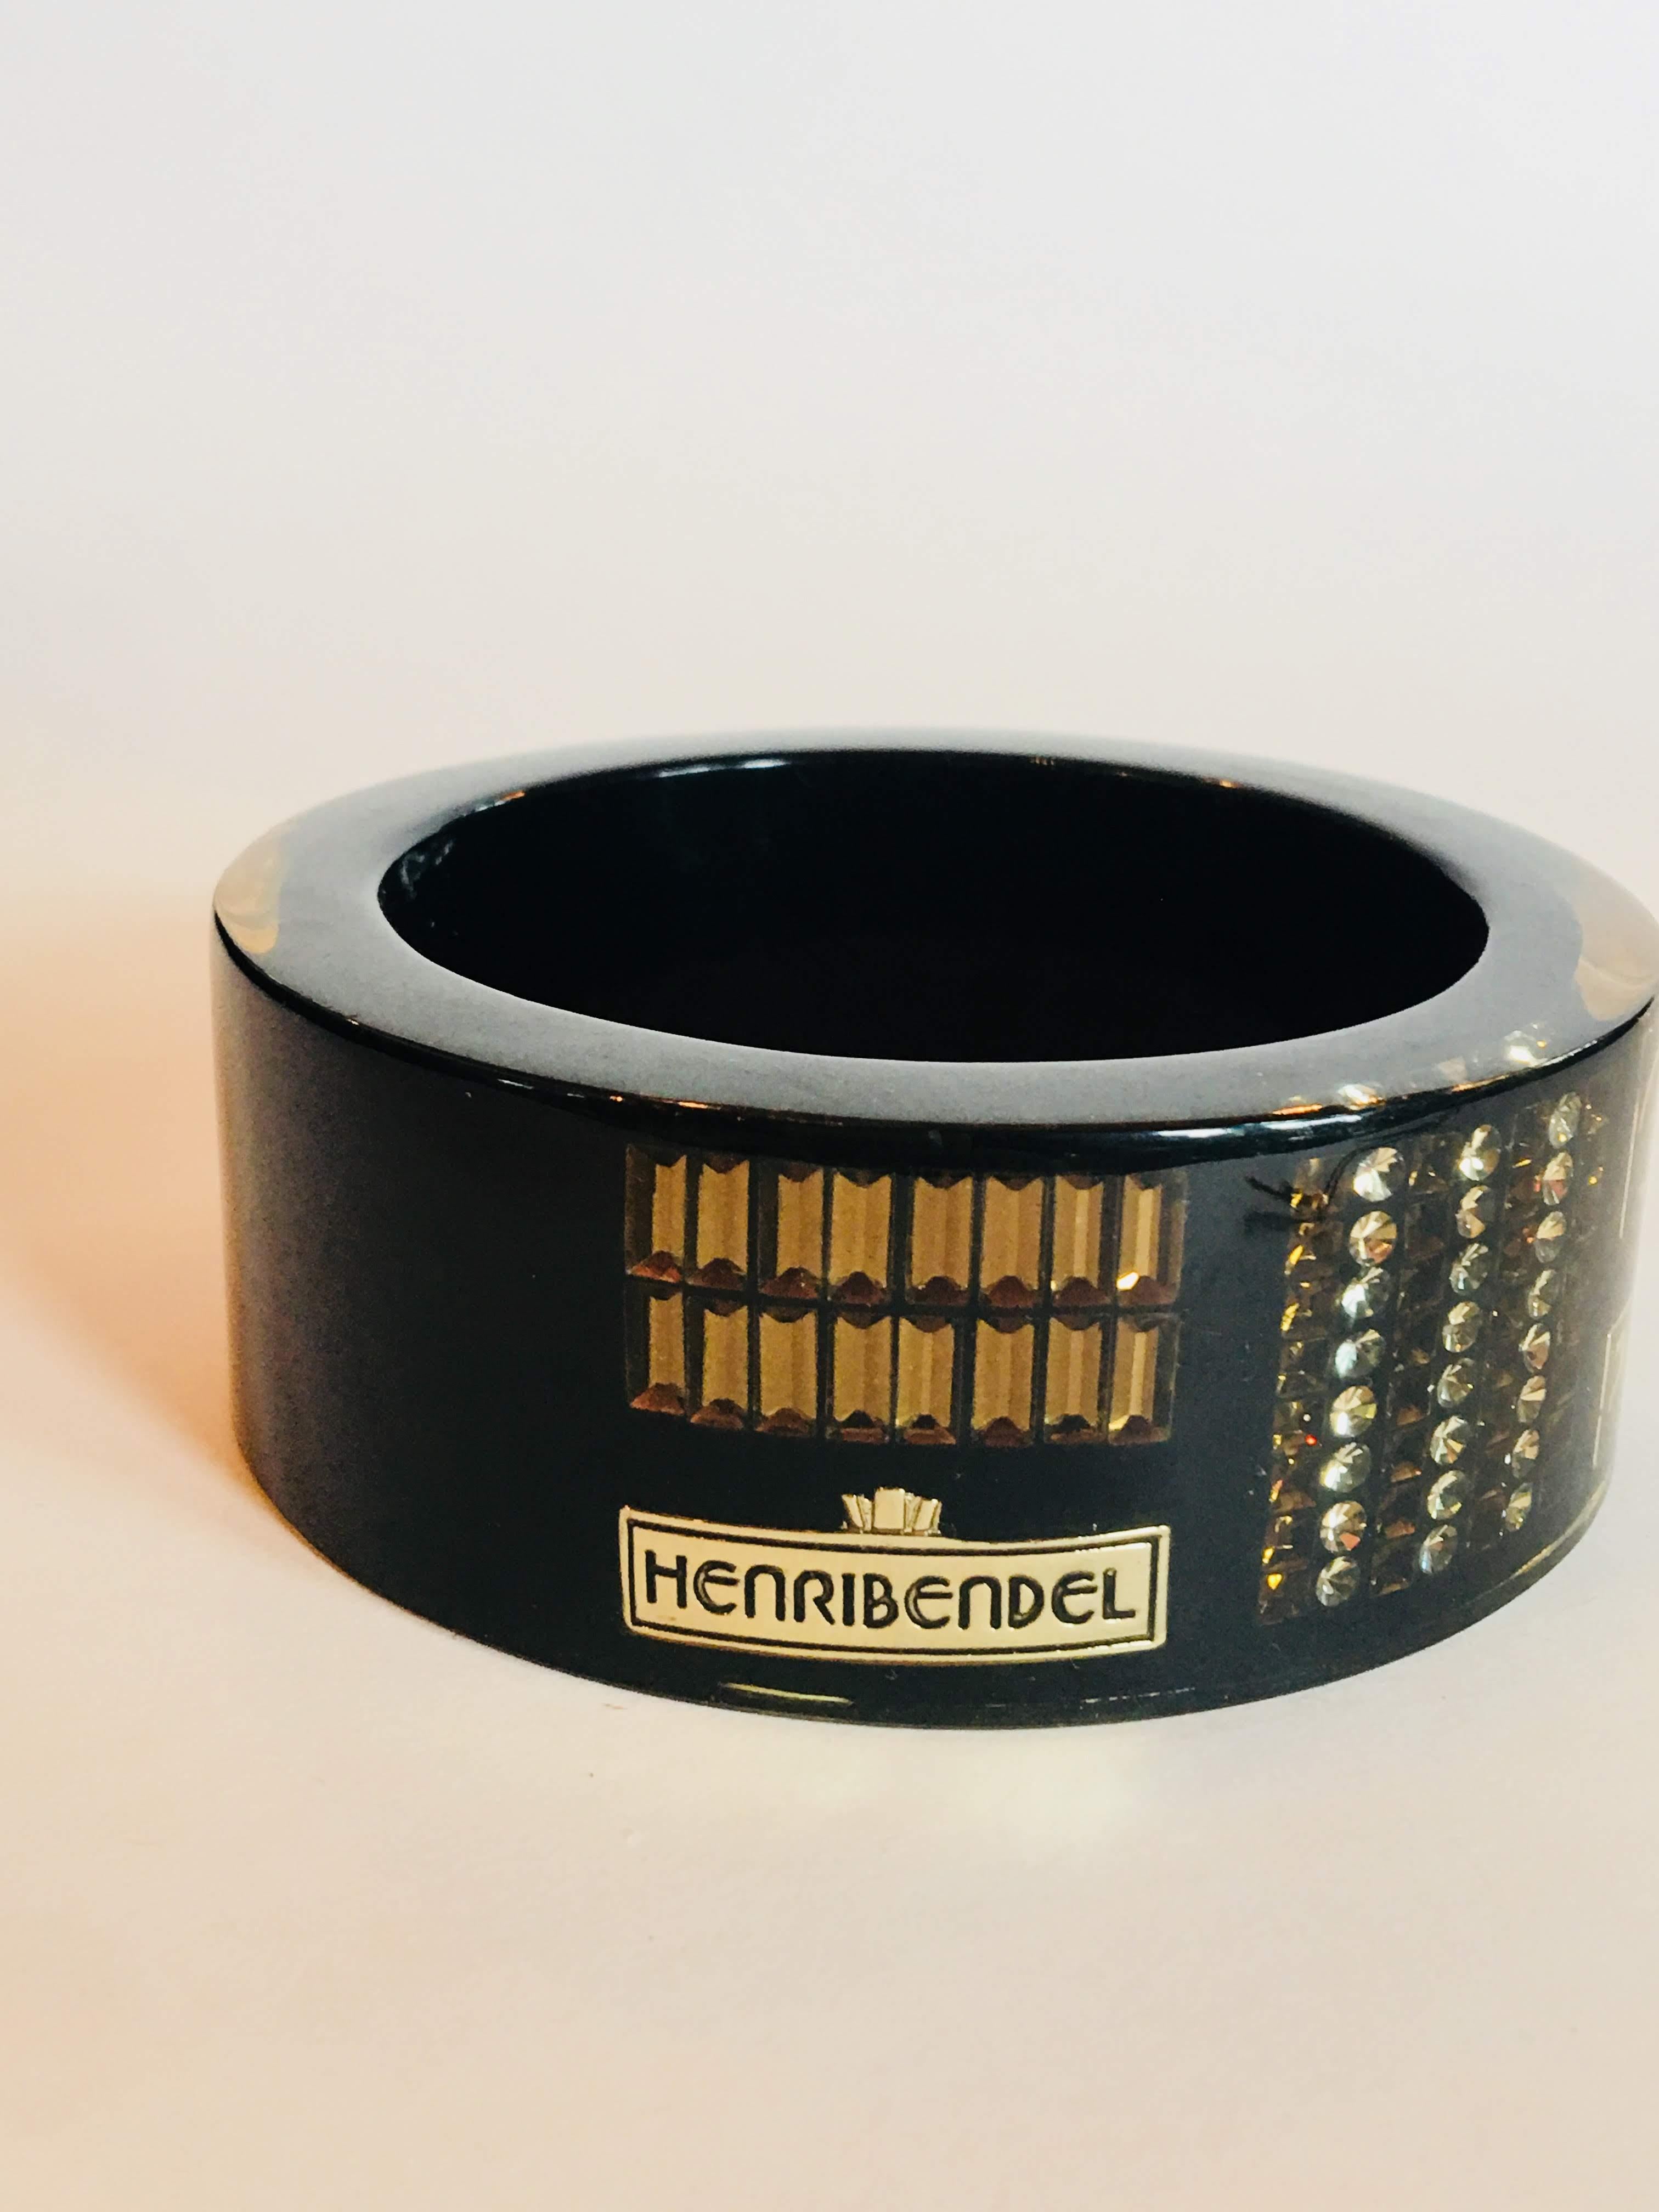 Henri Bendel Black Reisen Bangle with Gold Gems and Silhouette Details and Logo.